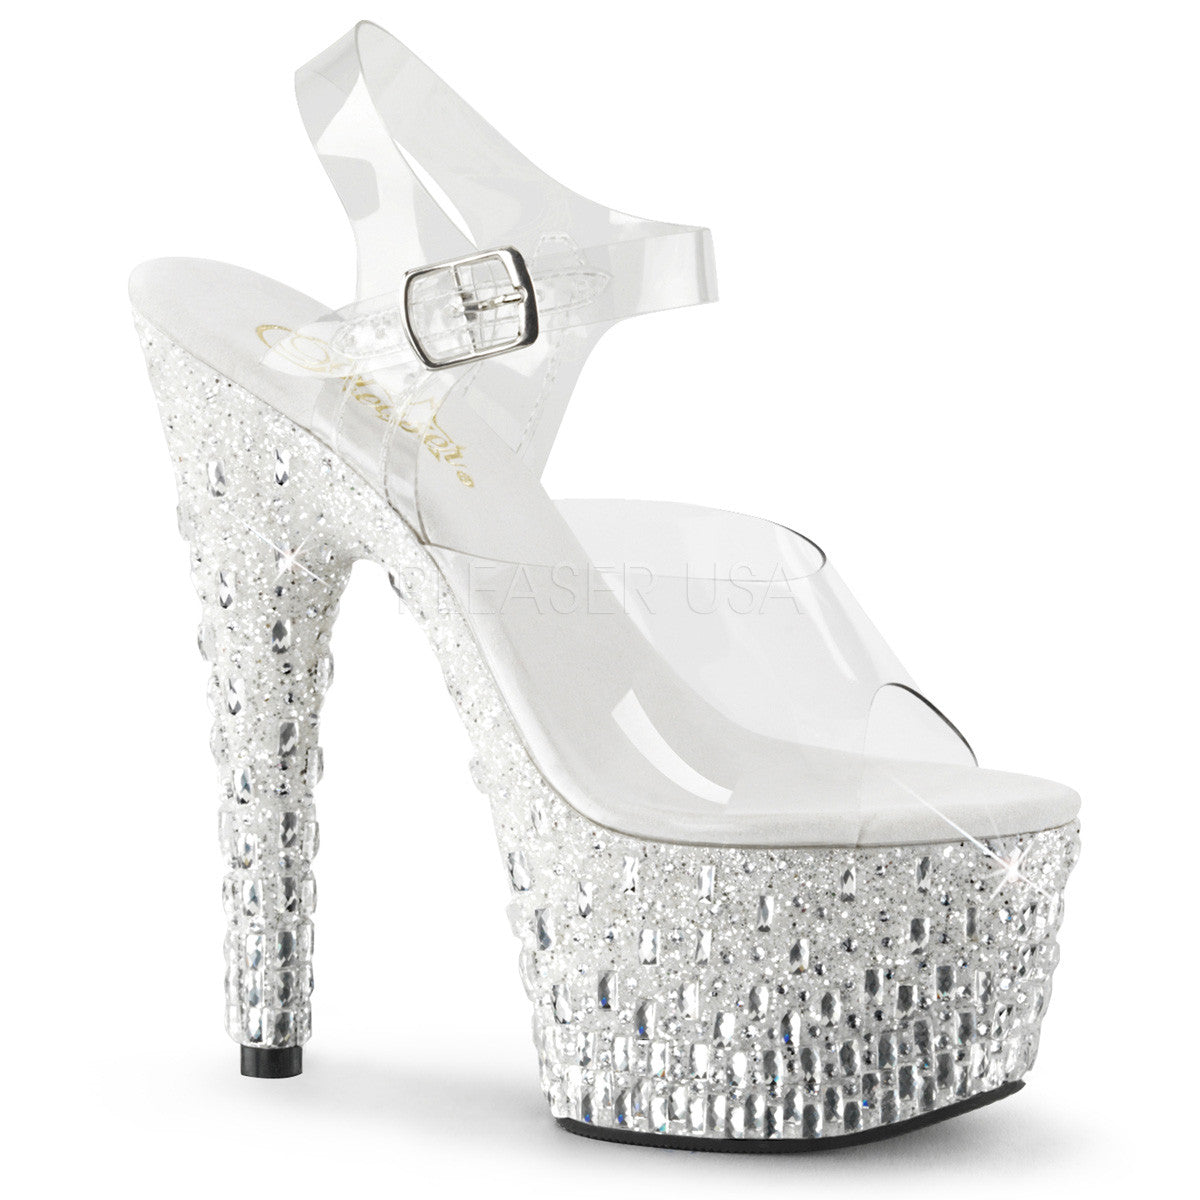 Pleaser ADORE-708MR-5 Clear With White-Silver Platform Ankle Strap Sandals - Shoecup.com - 1